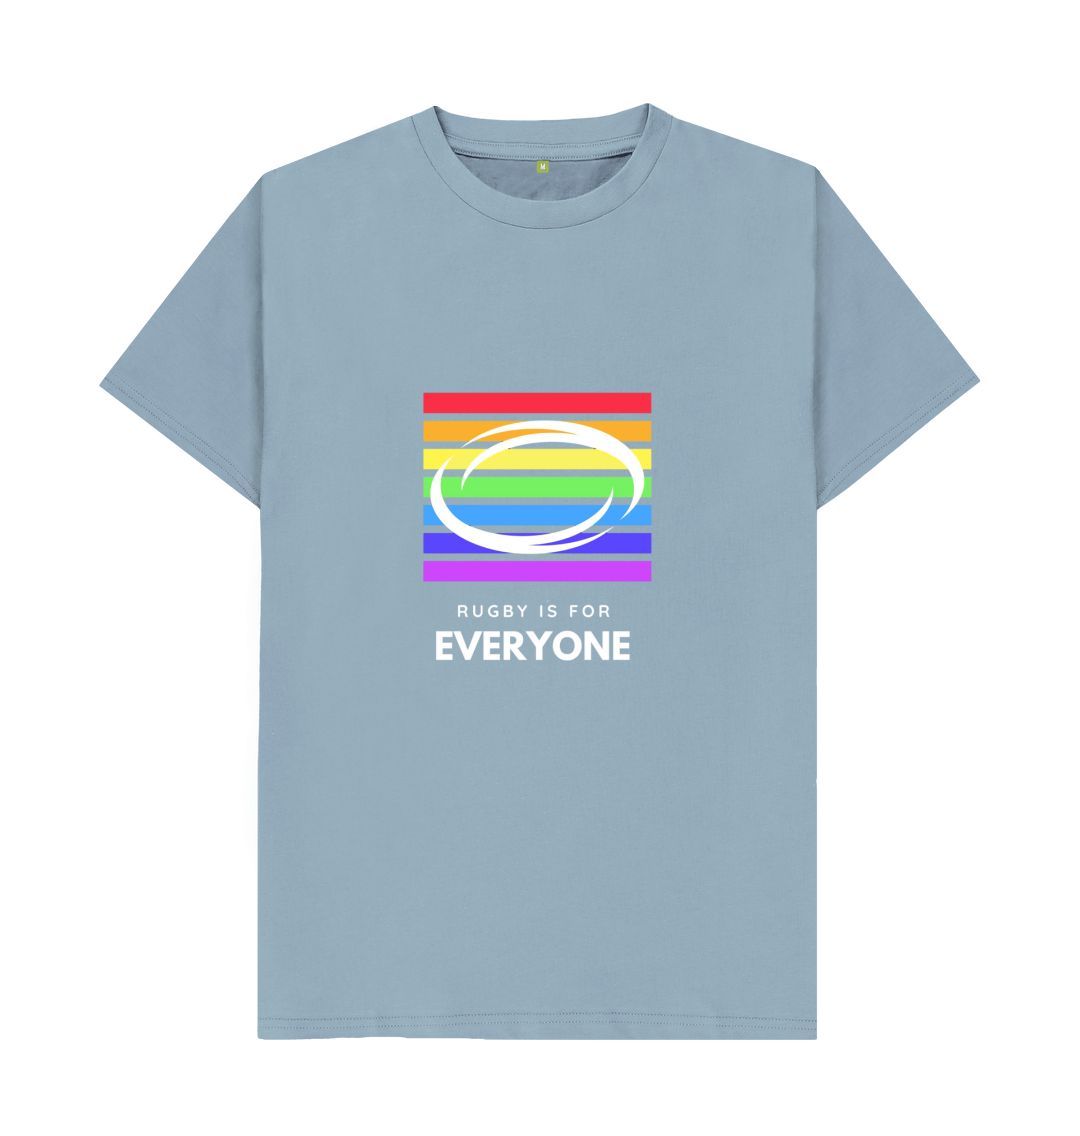 Stone Blue Adults T-Shirt - Rugby is for everyone